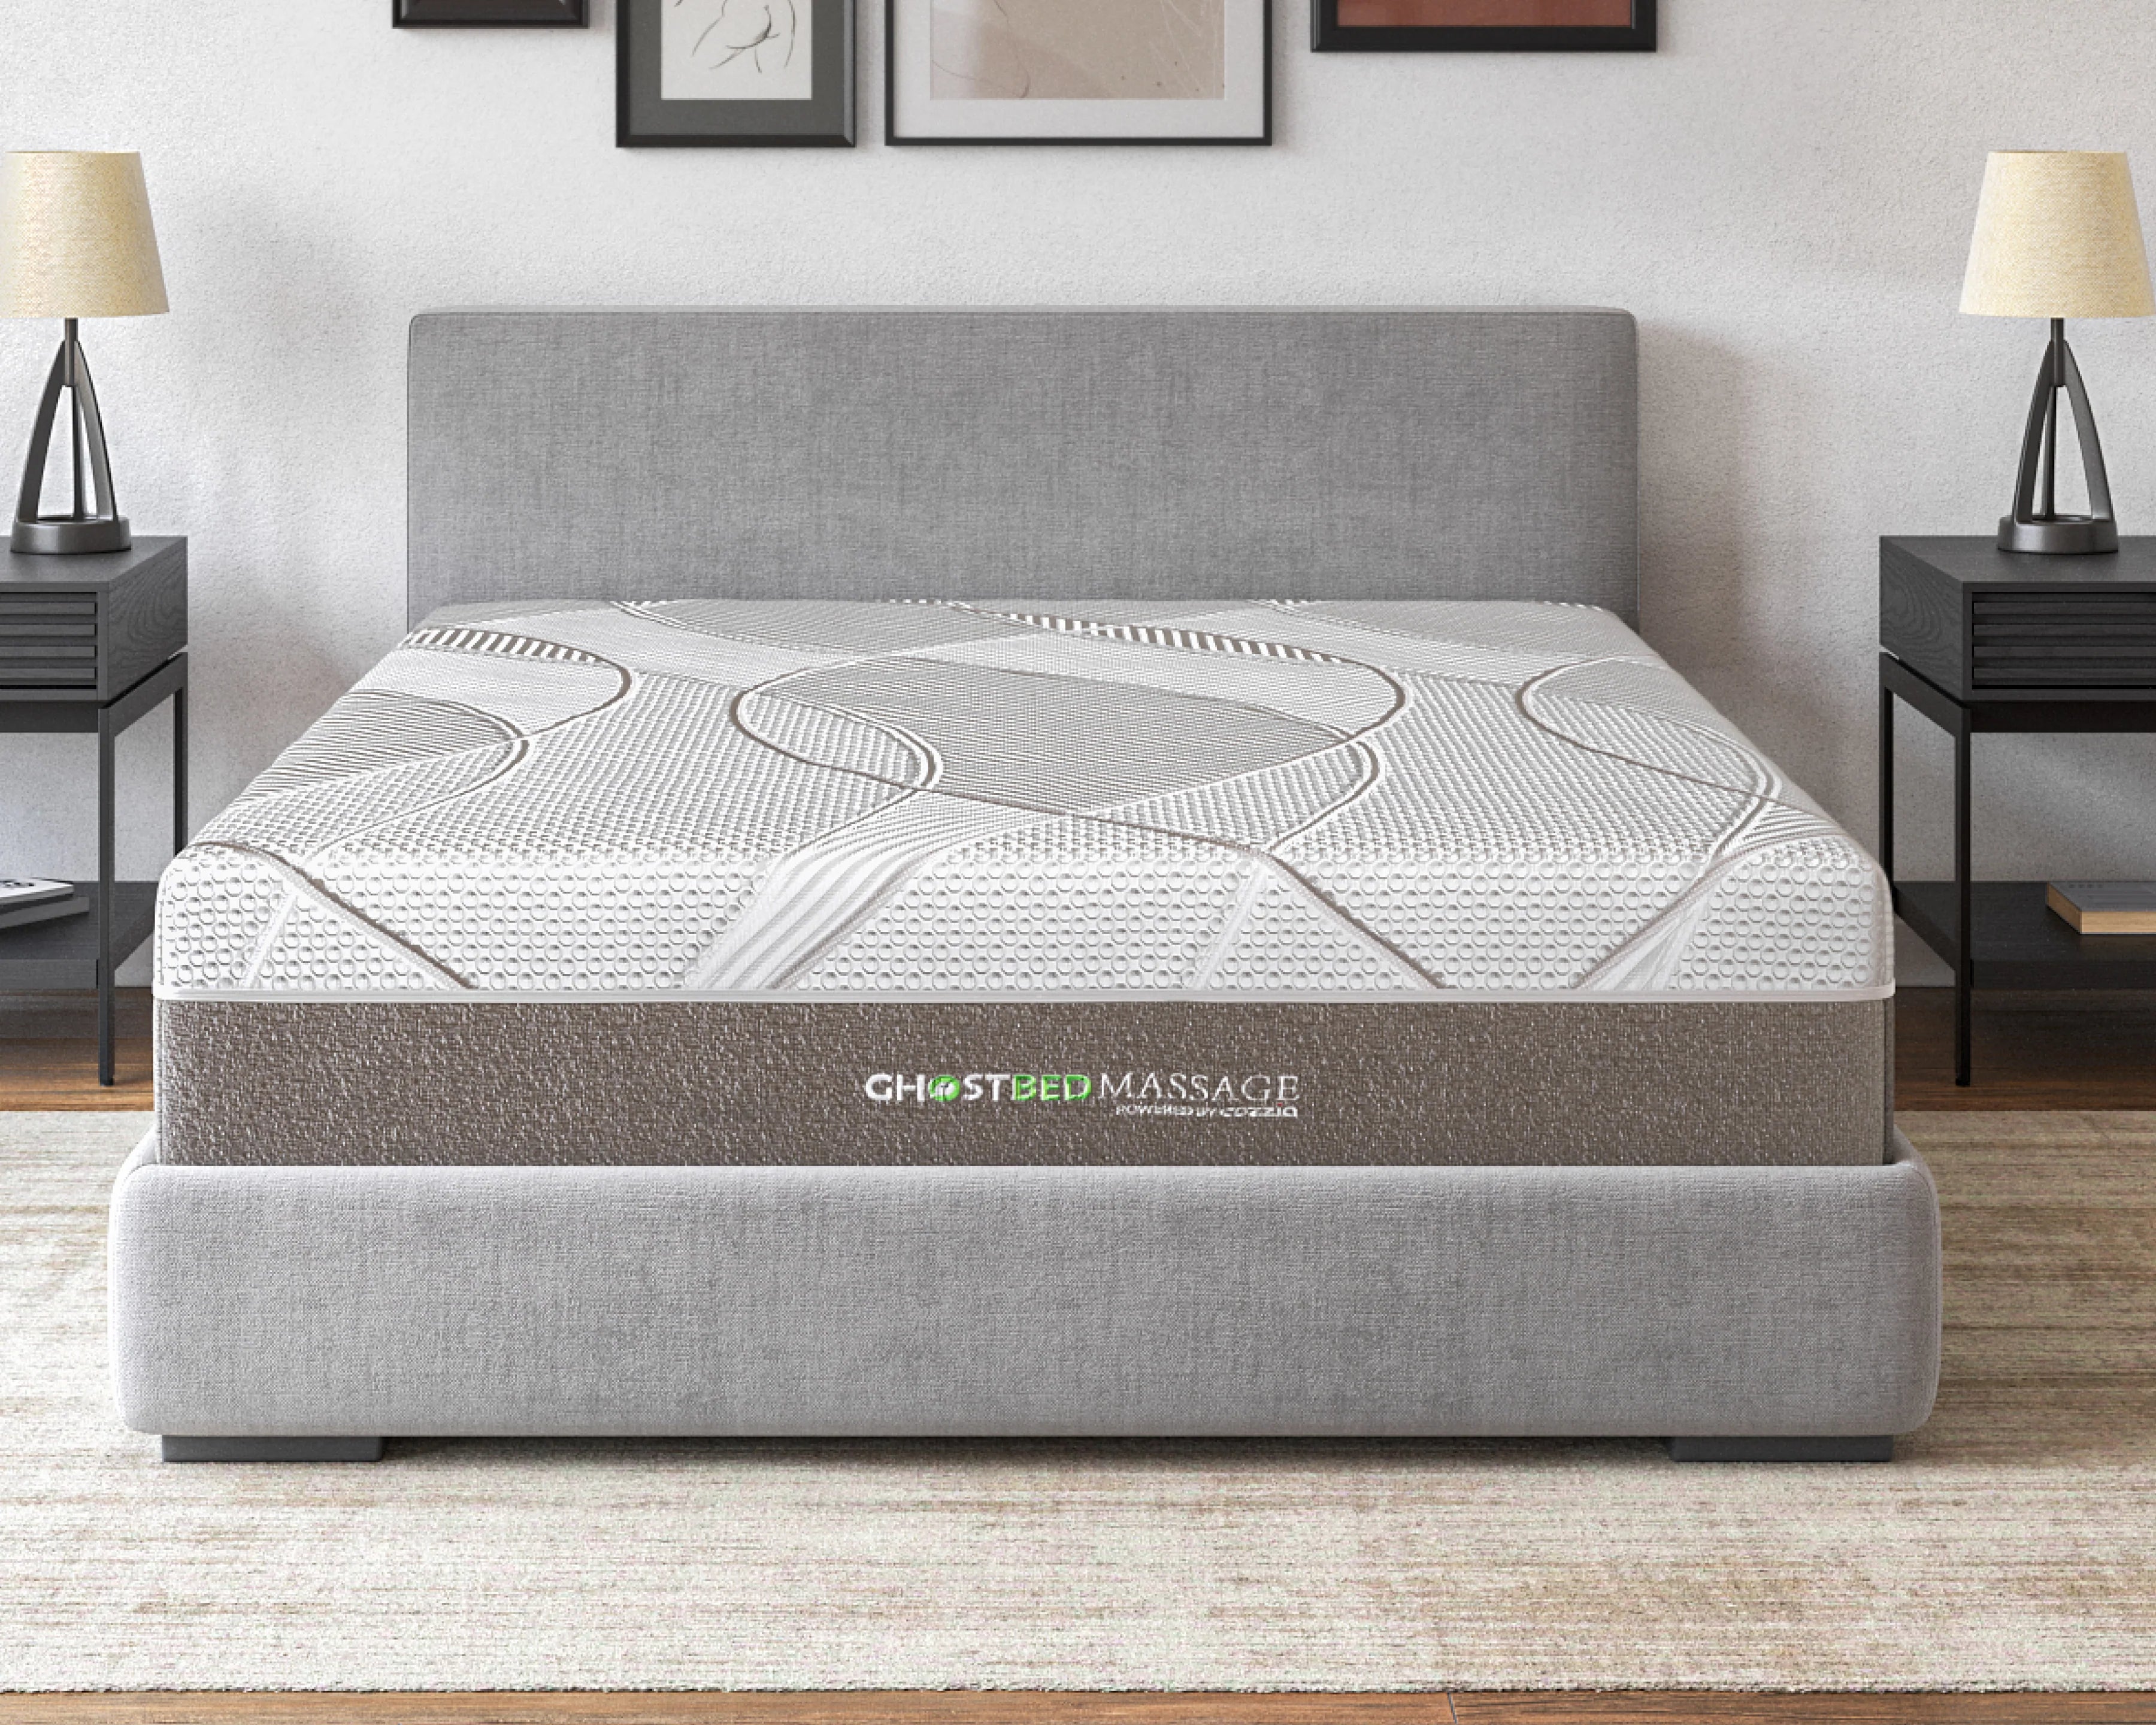 MASSAGE MATTRESS by GhostBed - Daily Massages at the Touch of a Button